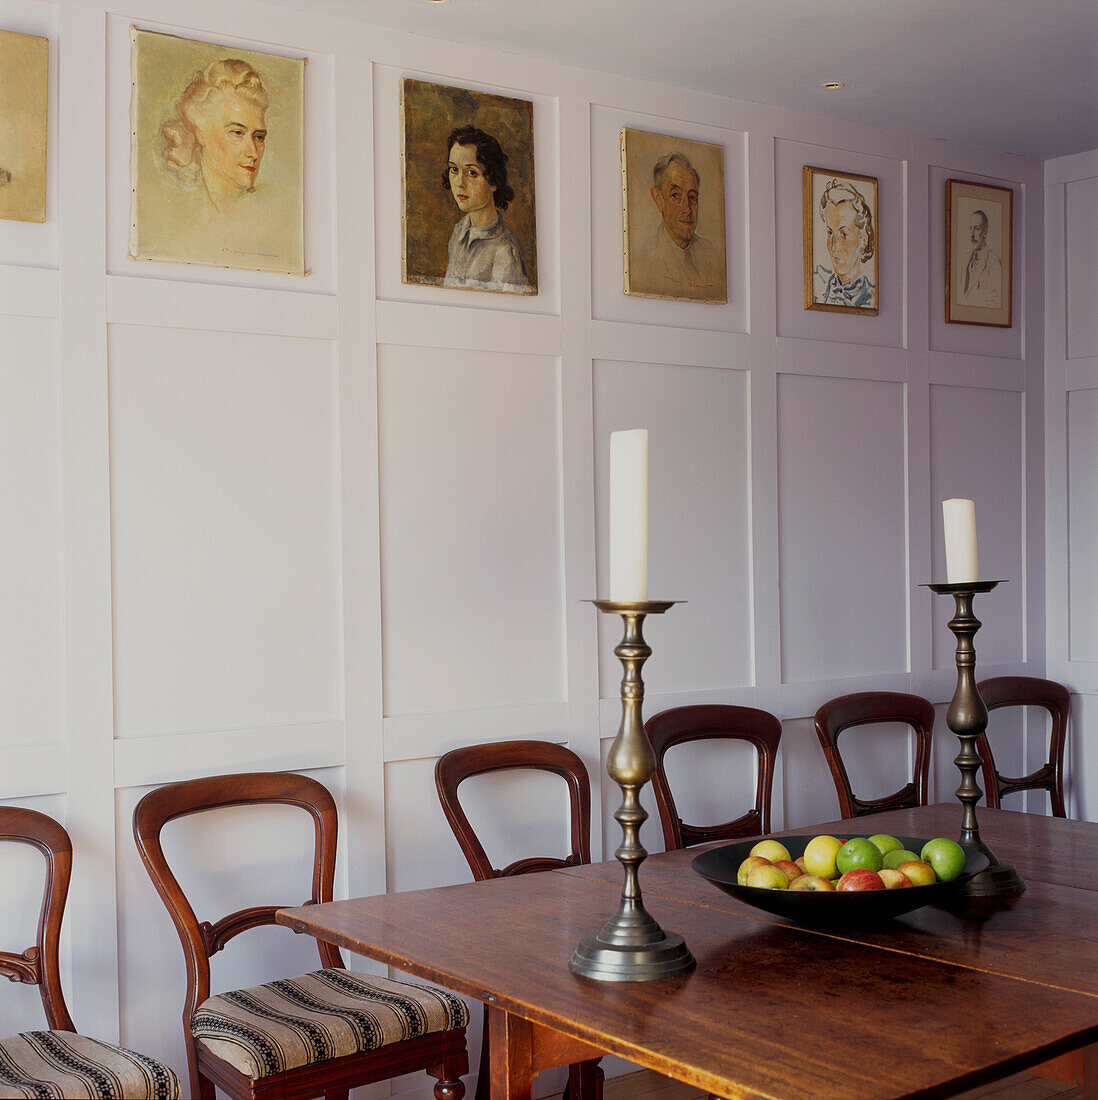 Dining room with oak dining table and chairs set with pewter candlesticks and a fruit bowl full of apples lilac painted wood panels and portraits on the wall